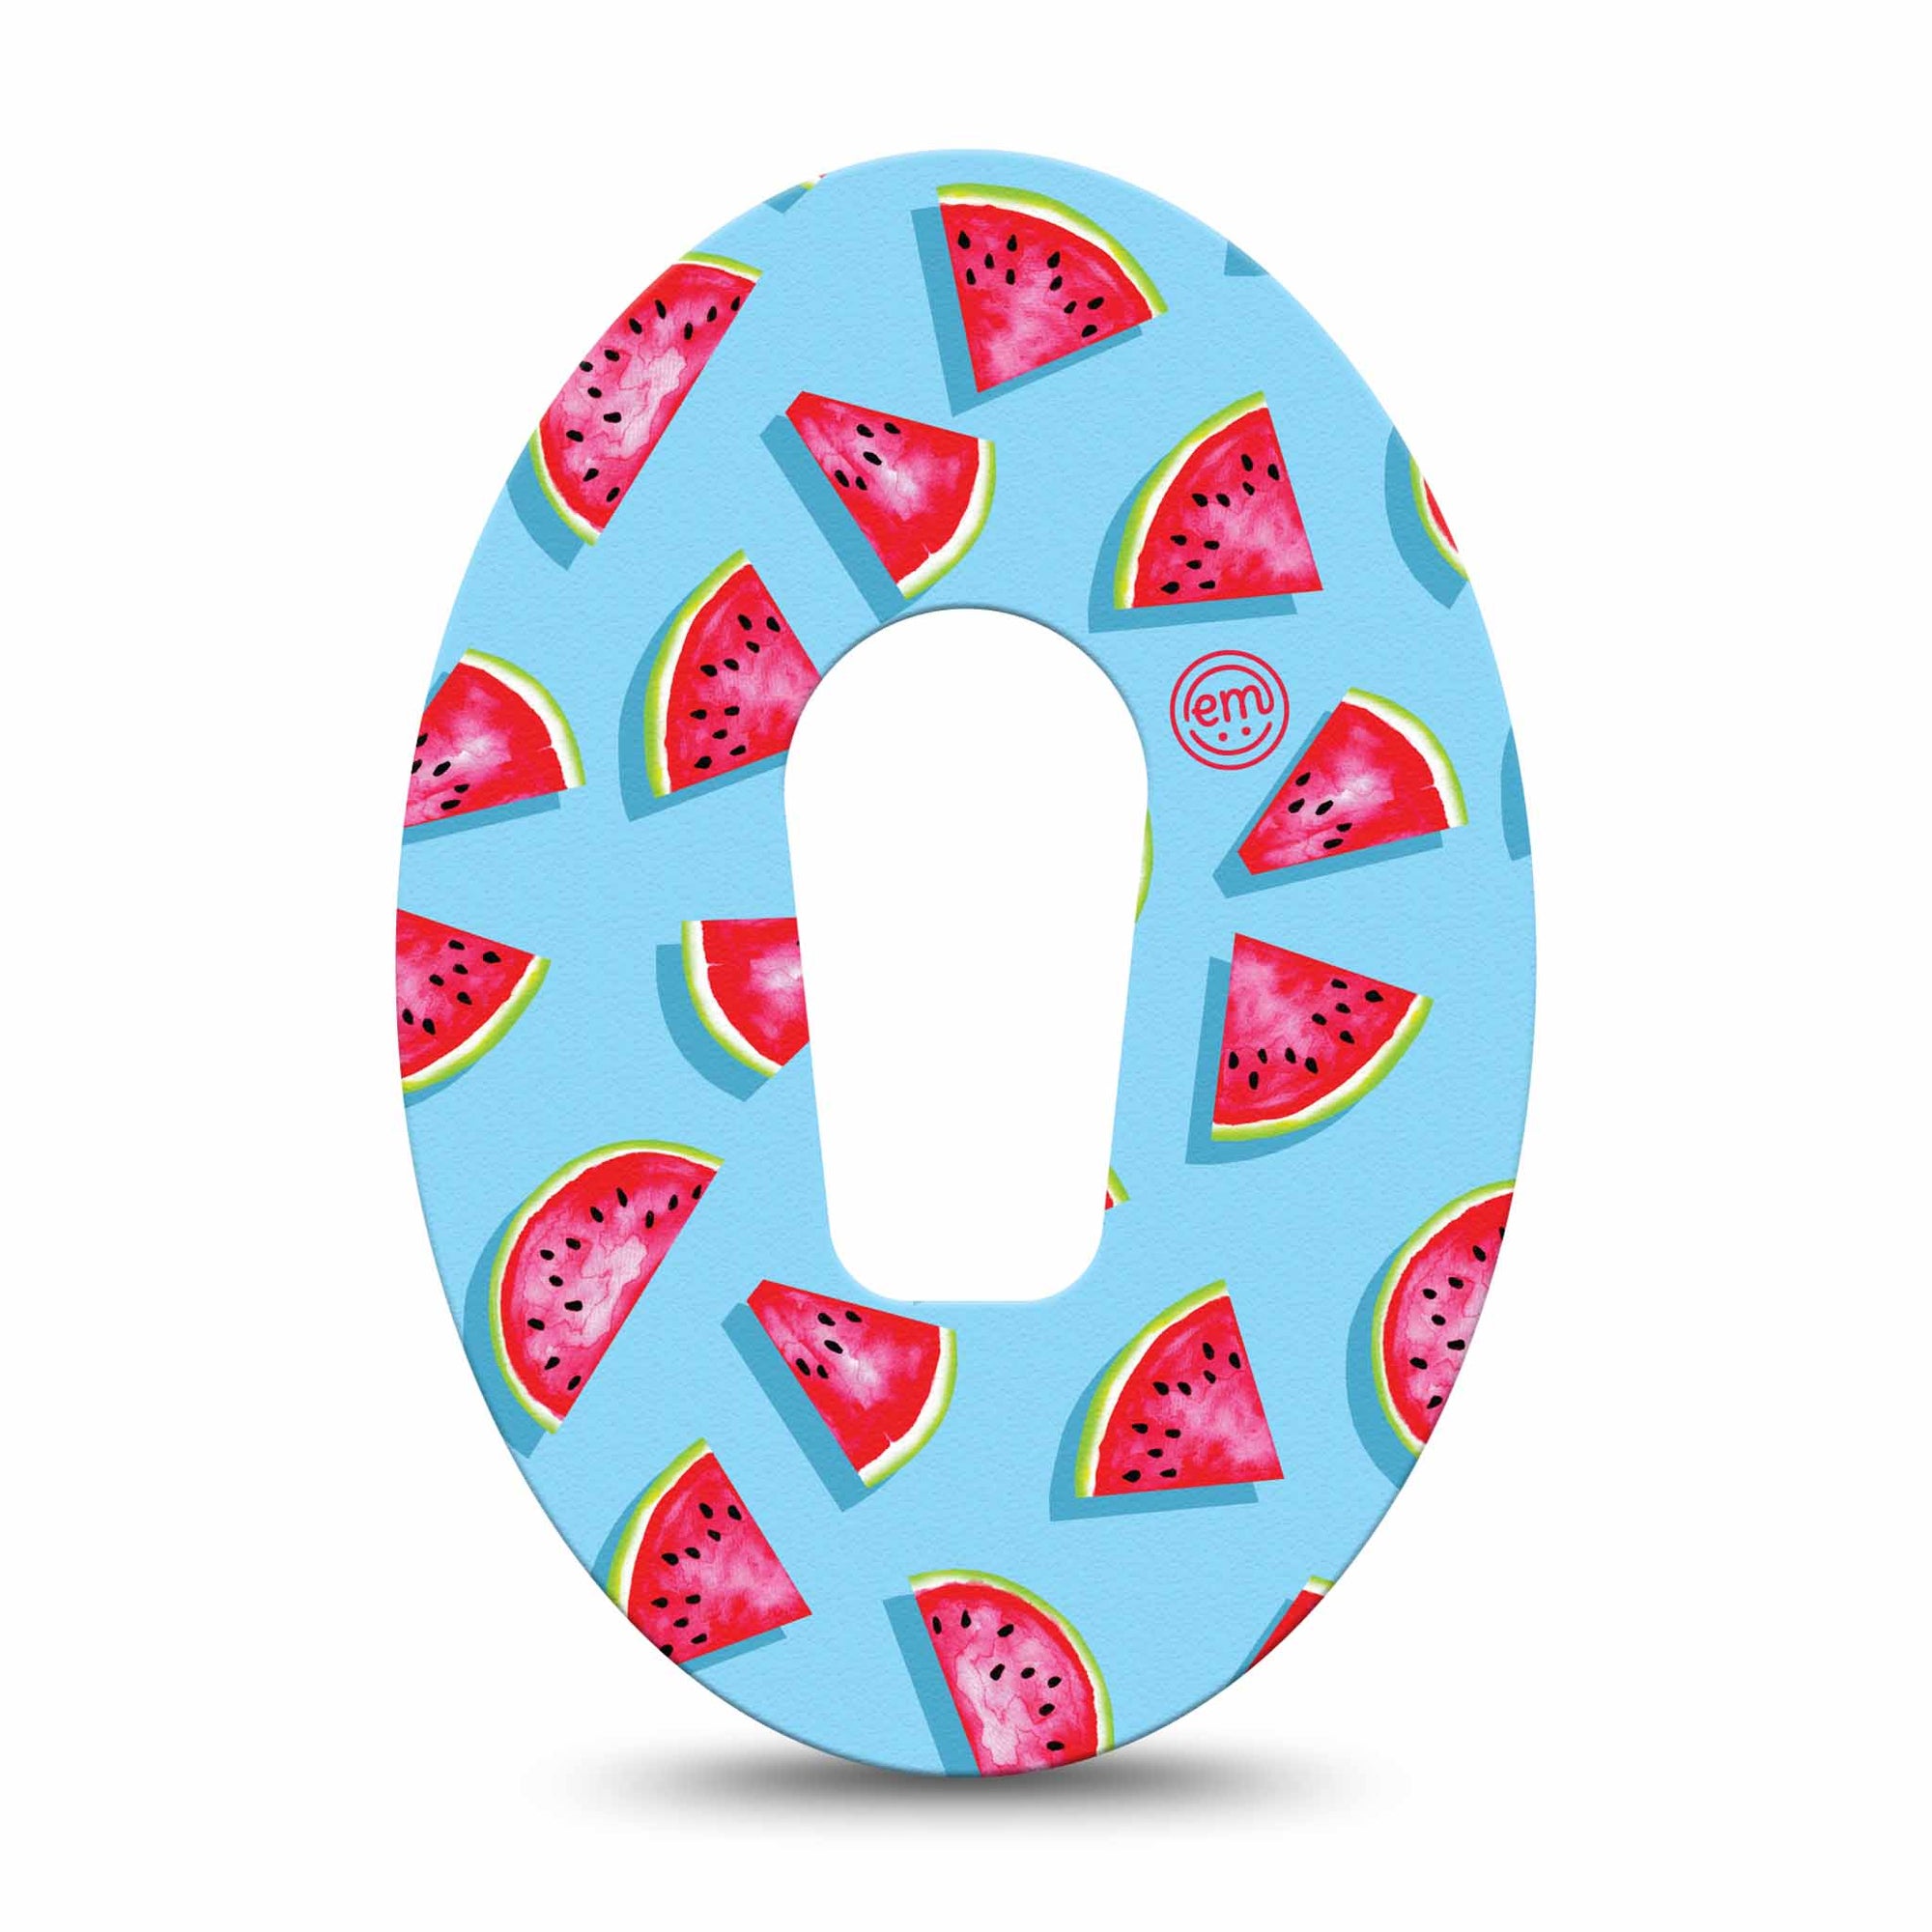 ExpressionMed Watermelon Slices G6 Tape